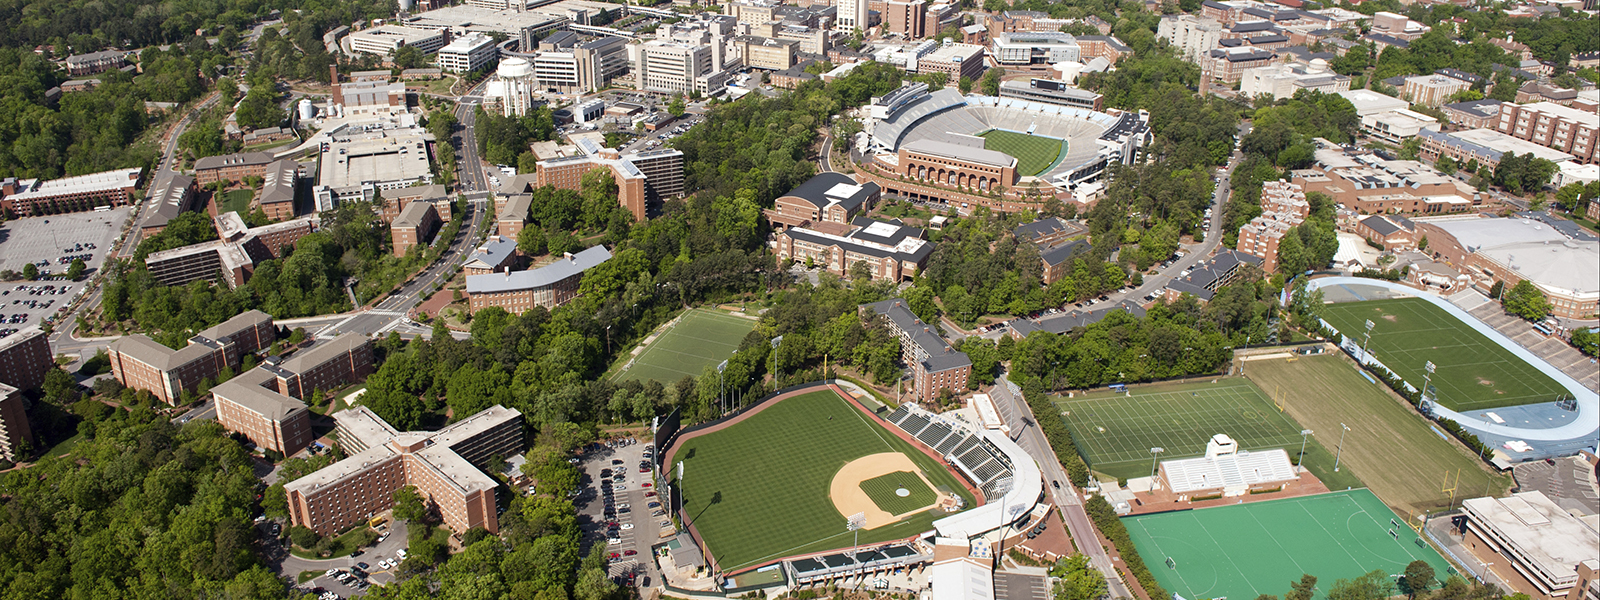 Aerial view of the University of North Carolina campus 